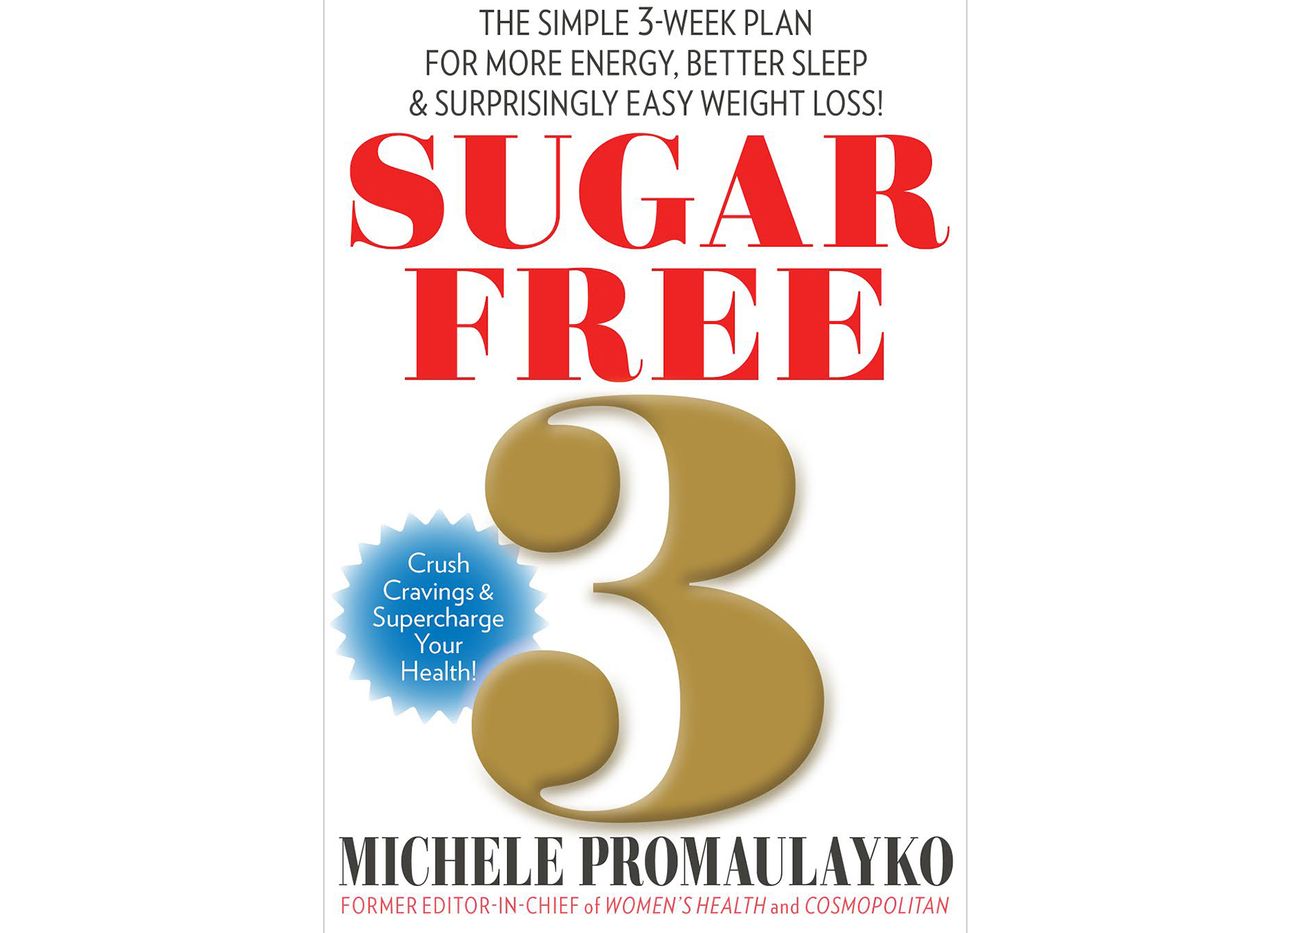 The book cover for Sugar Free 3.